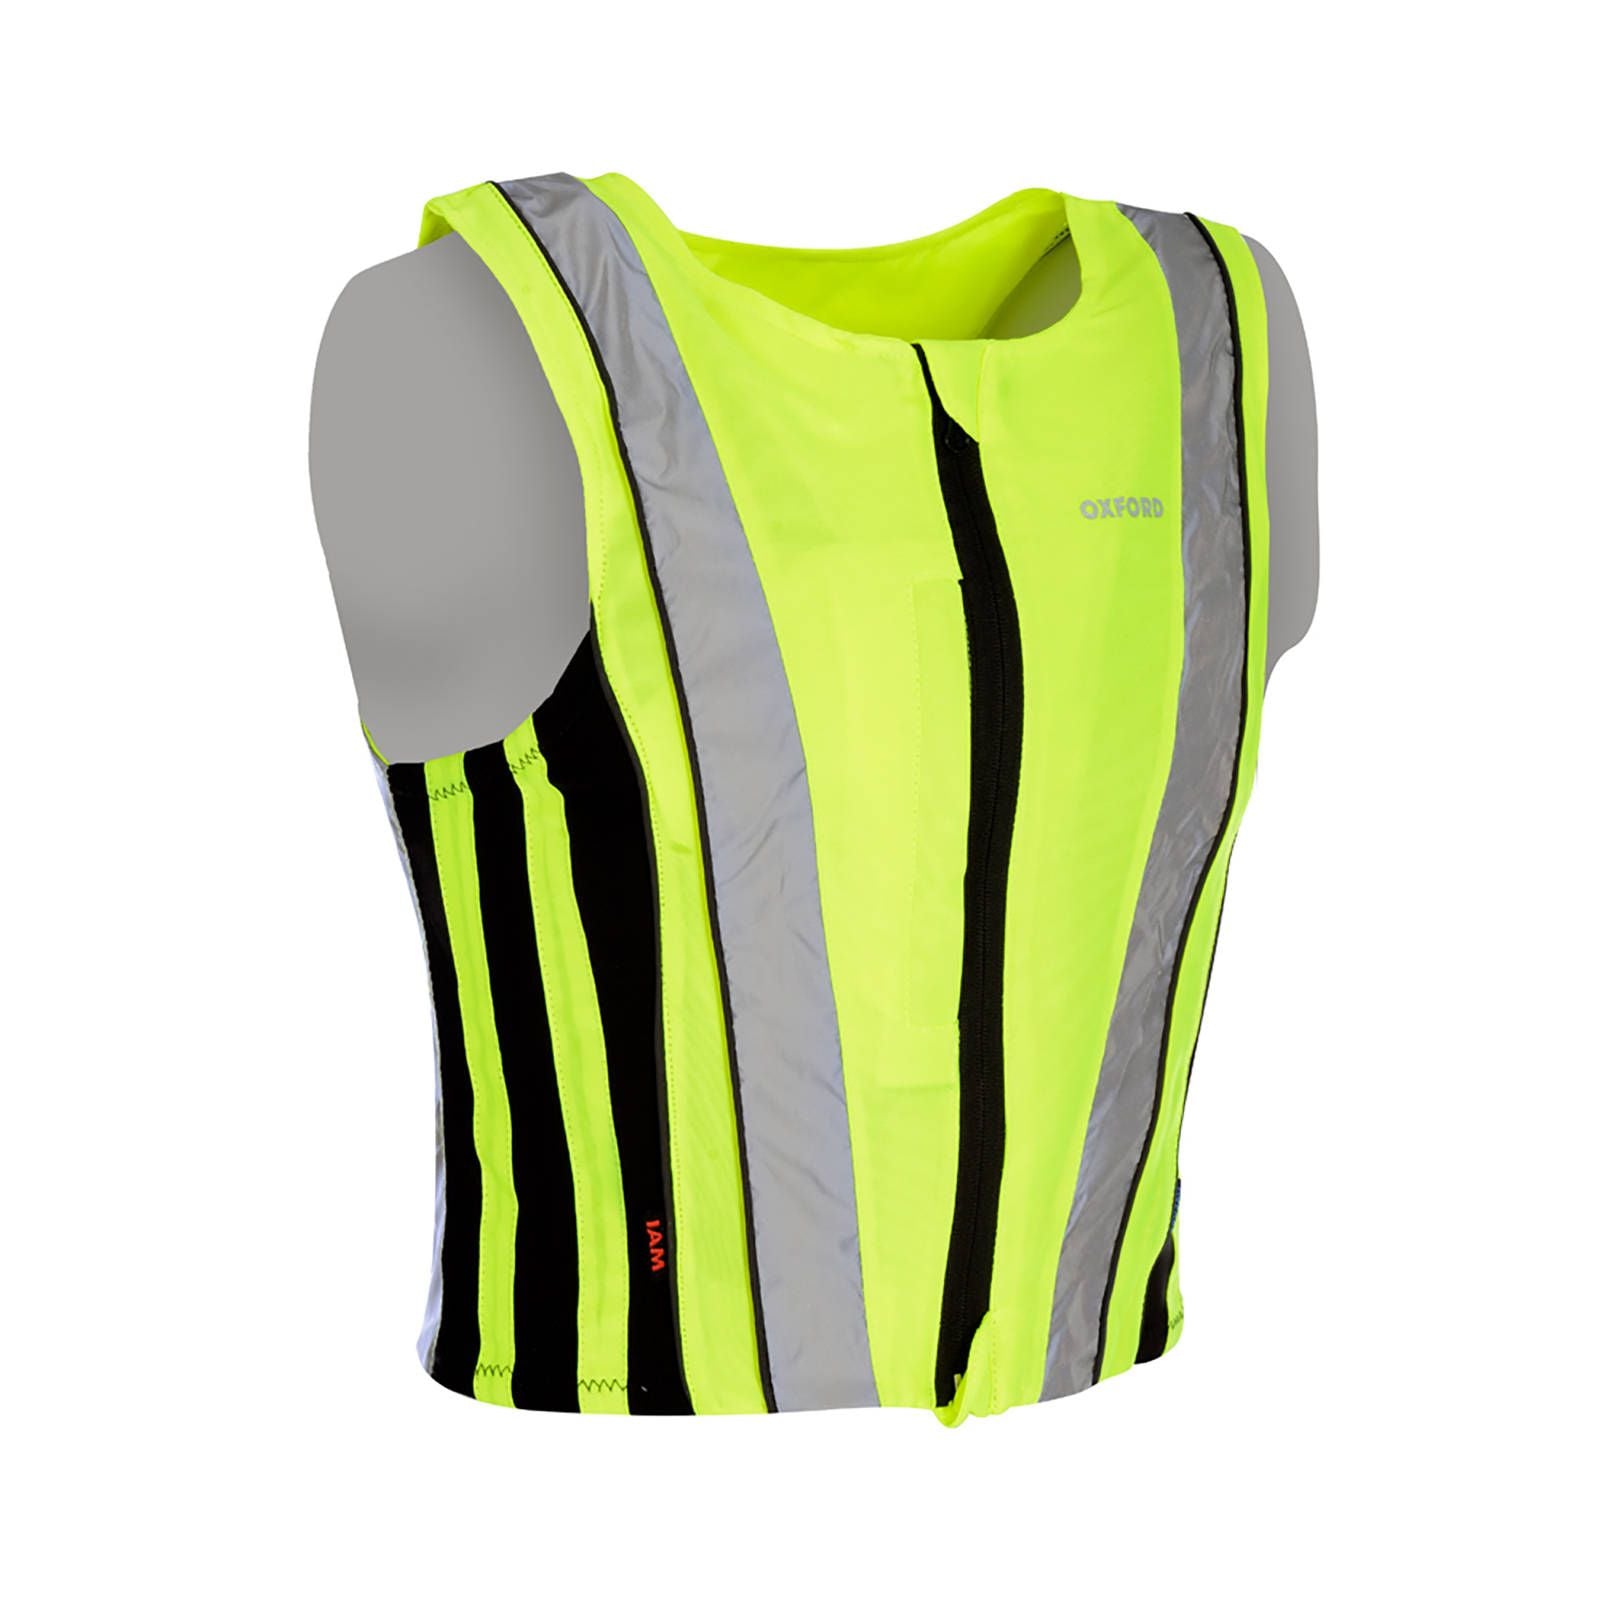 New OXFORD Bright Top Active High Visibility Vest CE Approved - 2XL #OXOF404